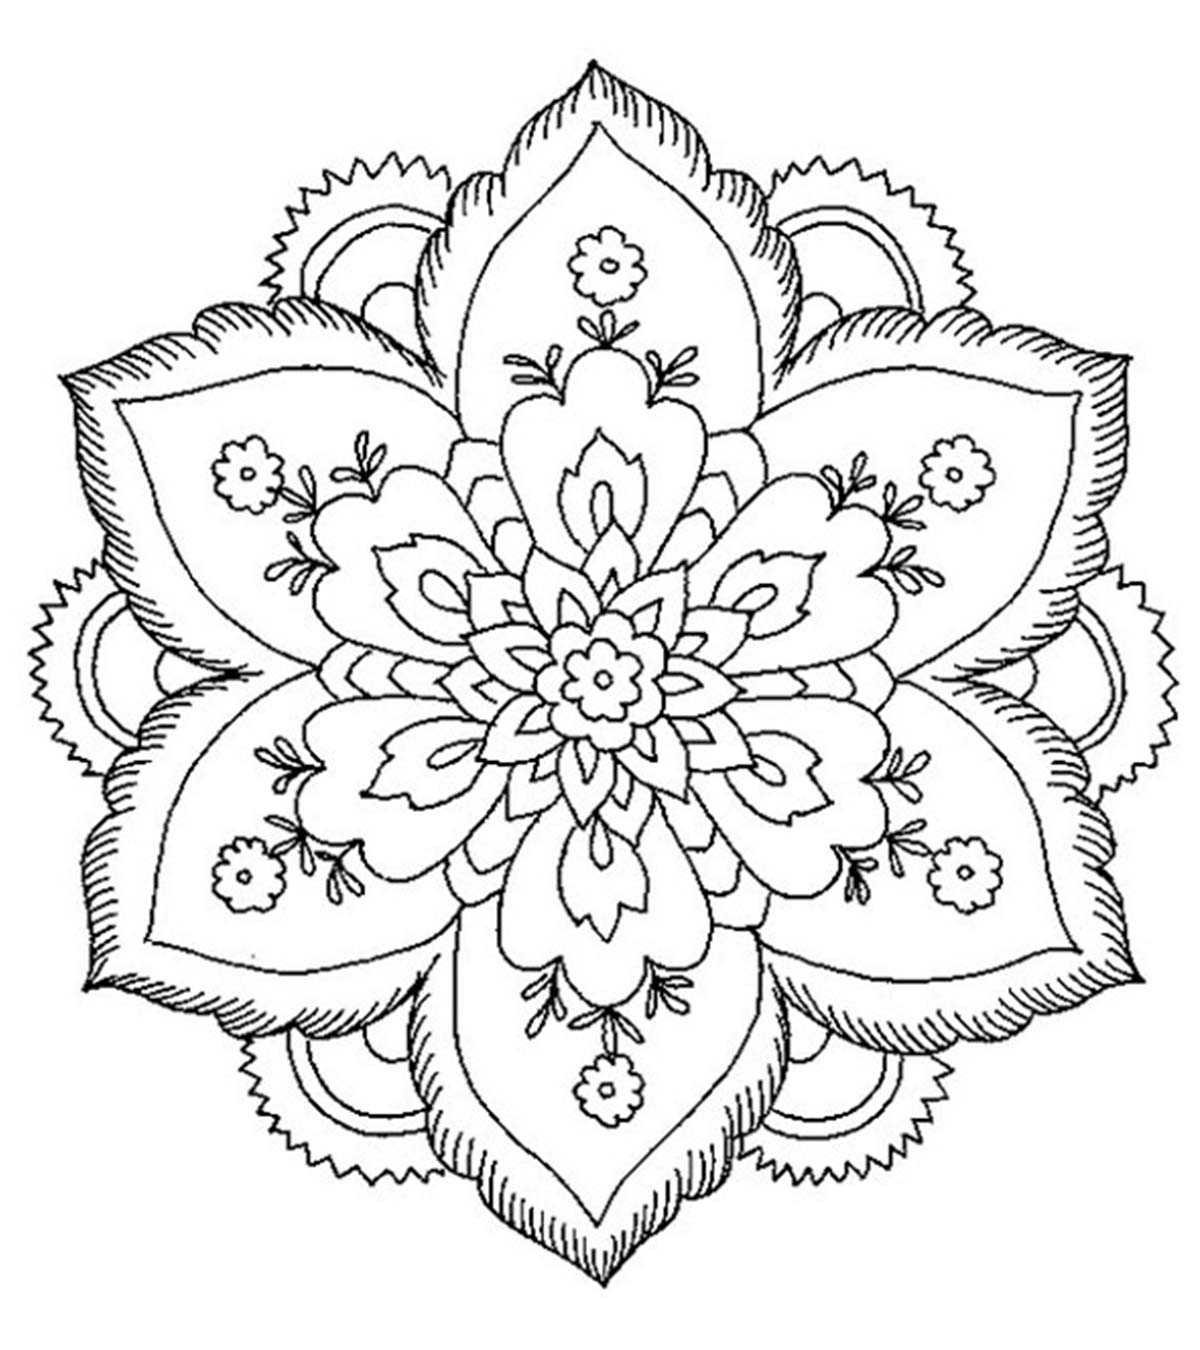 Abstract Coloring Pages - Free Printable - MomJunction